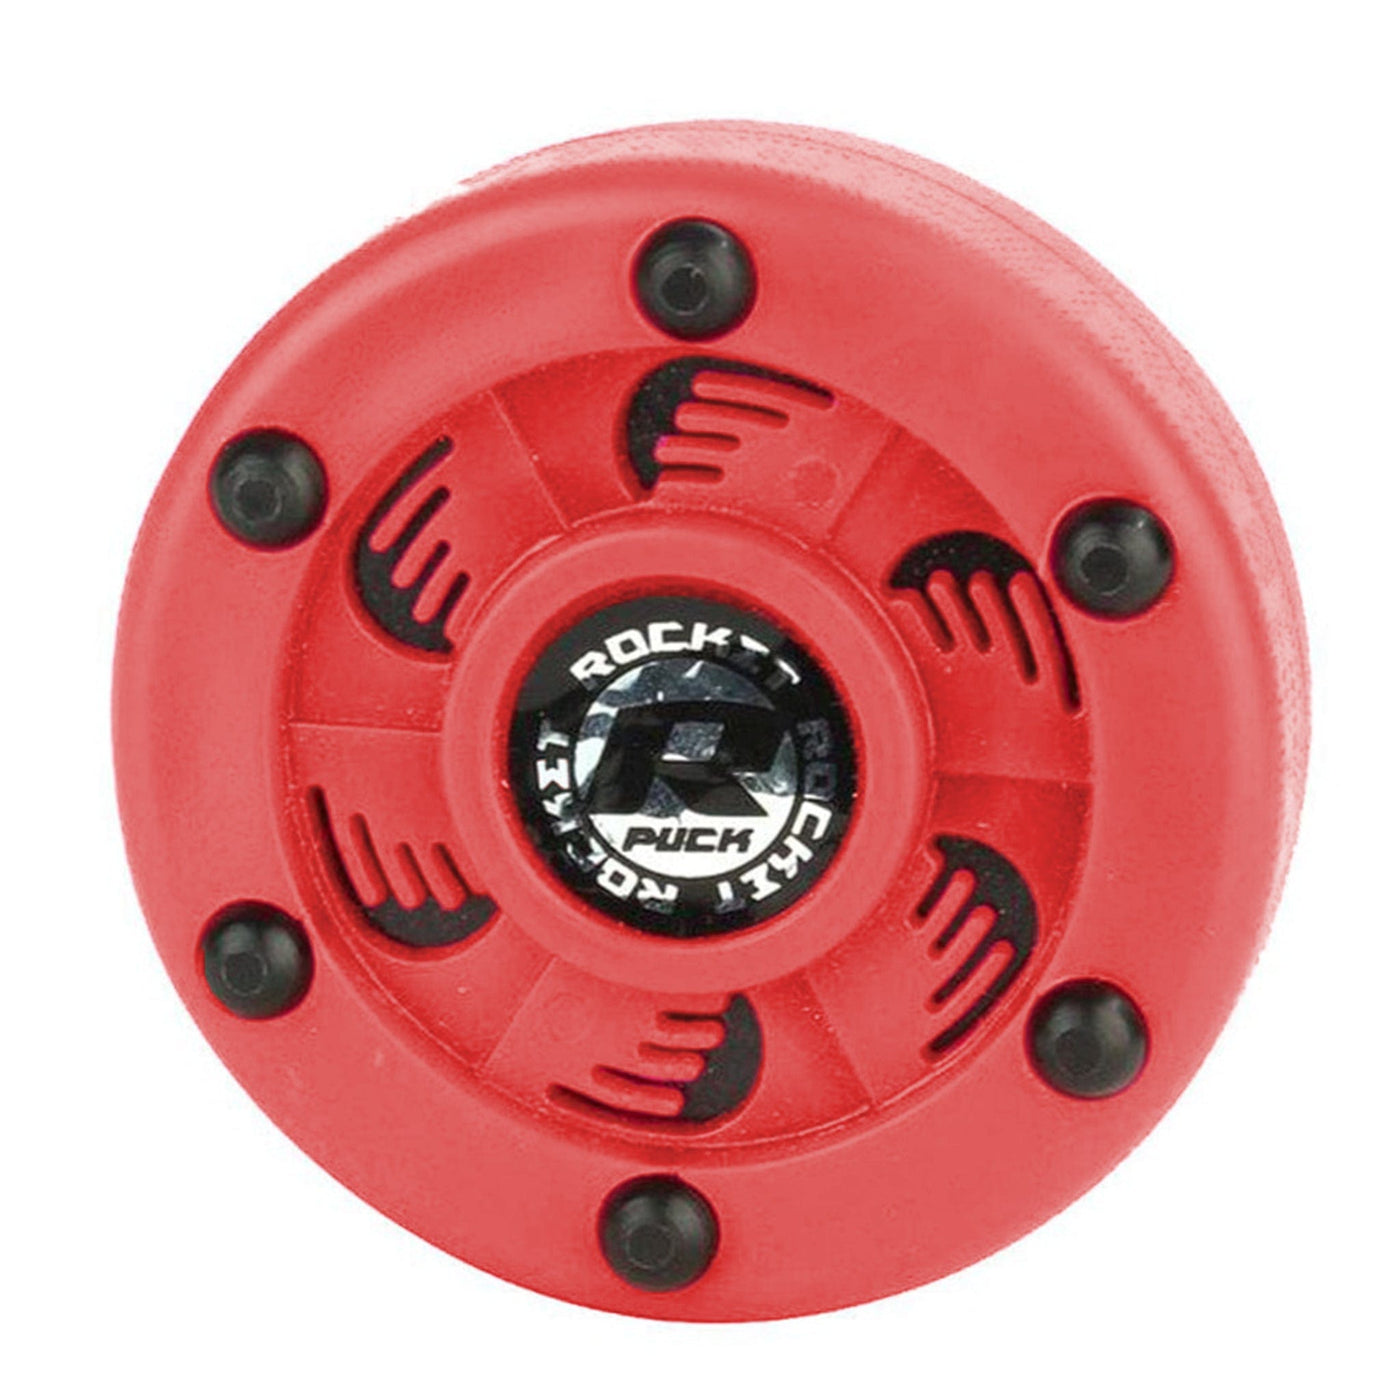 Rocket Puck Roller Hockey Puck - The Hockey Shop Source For Sports